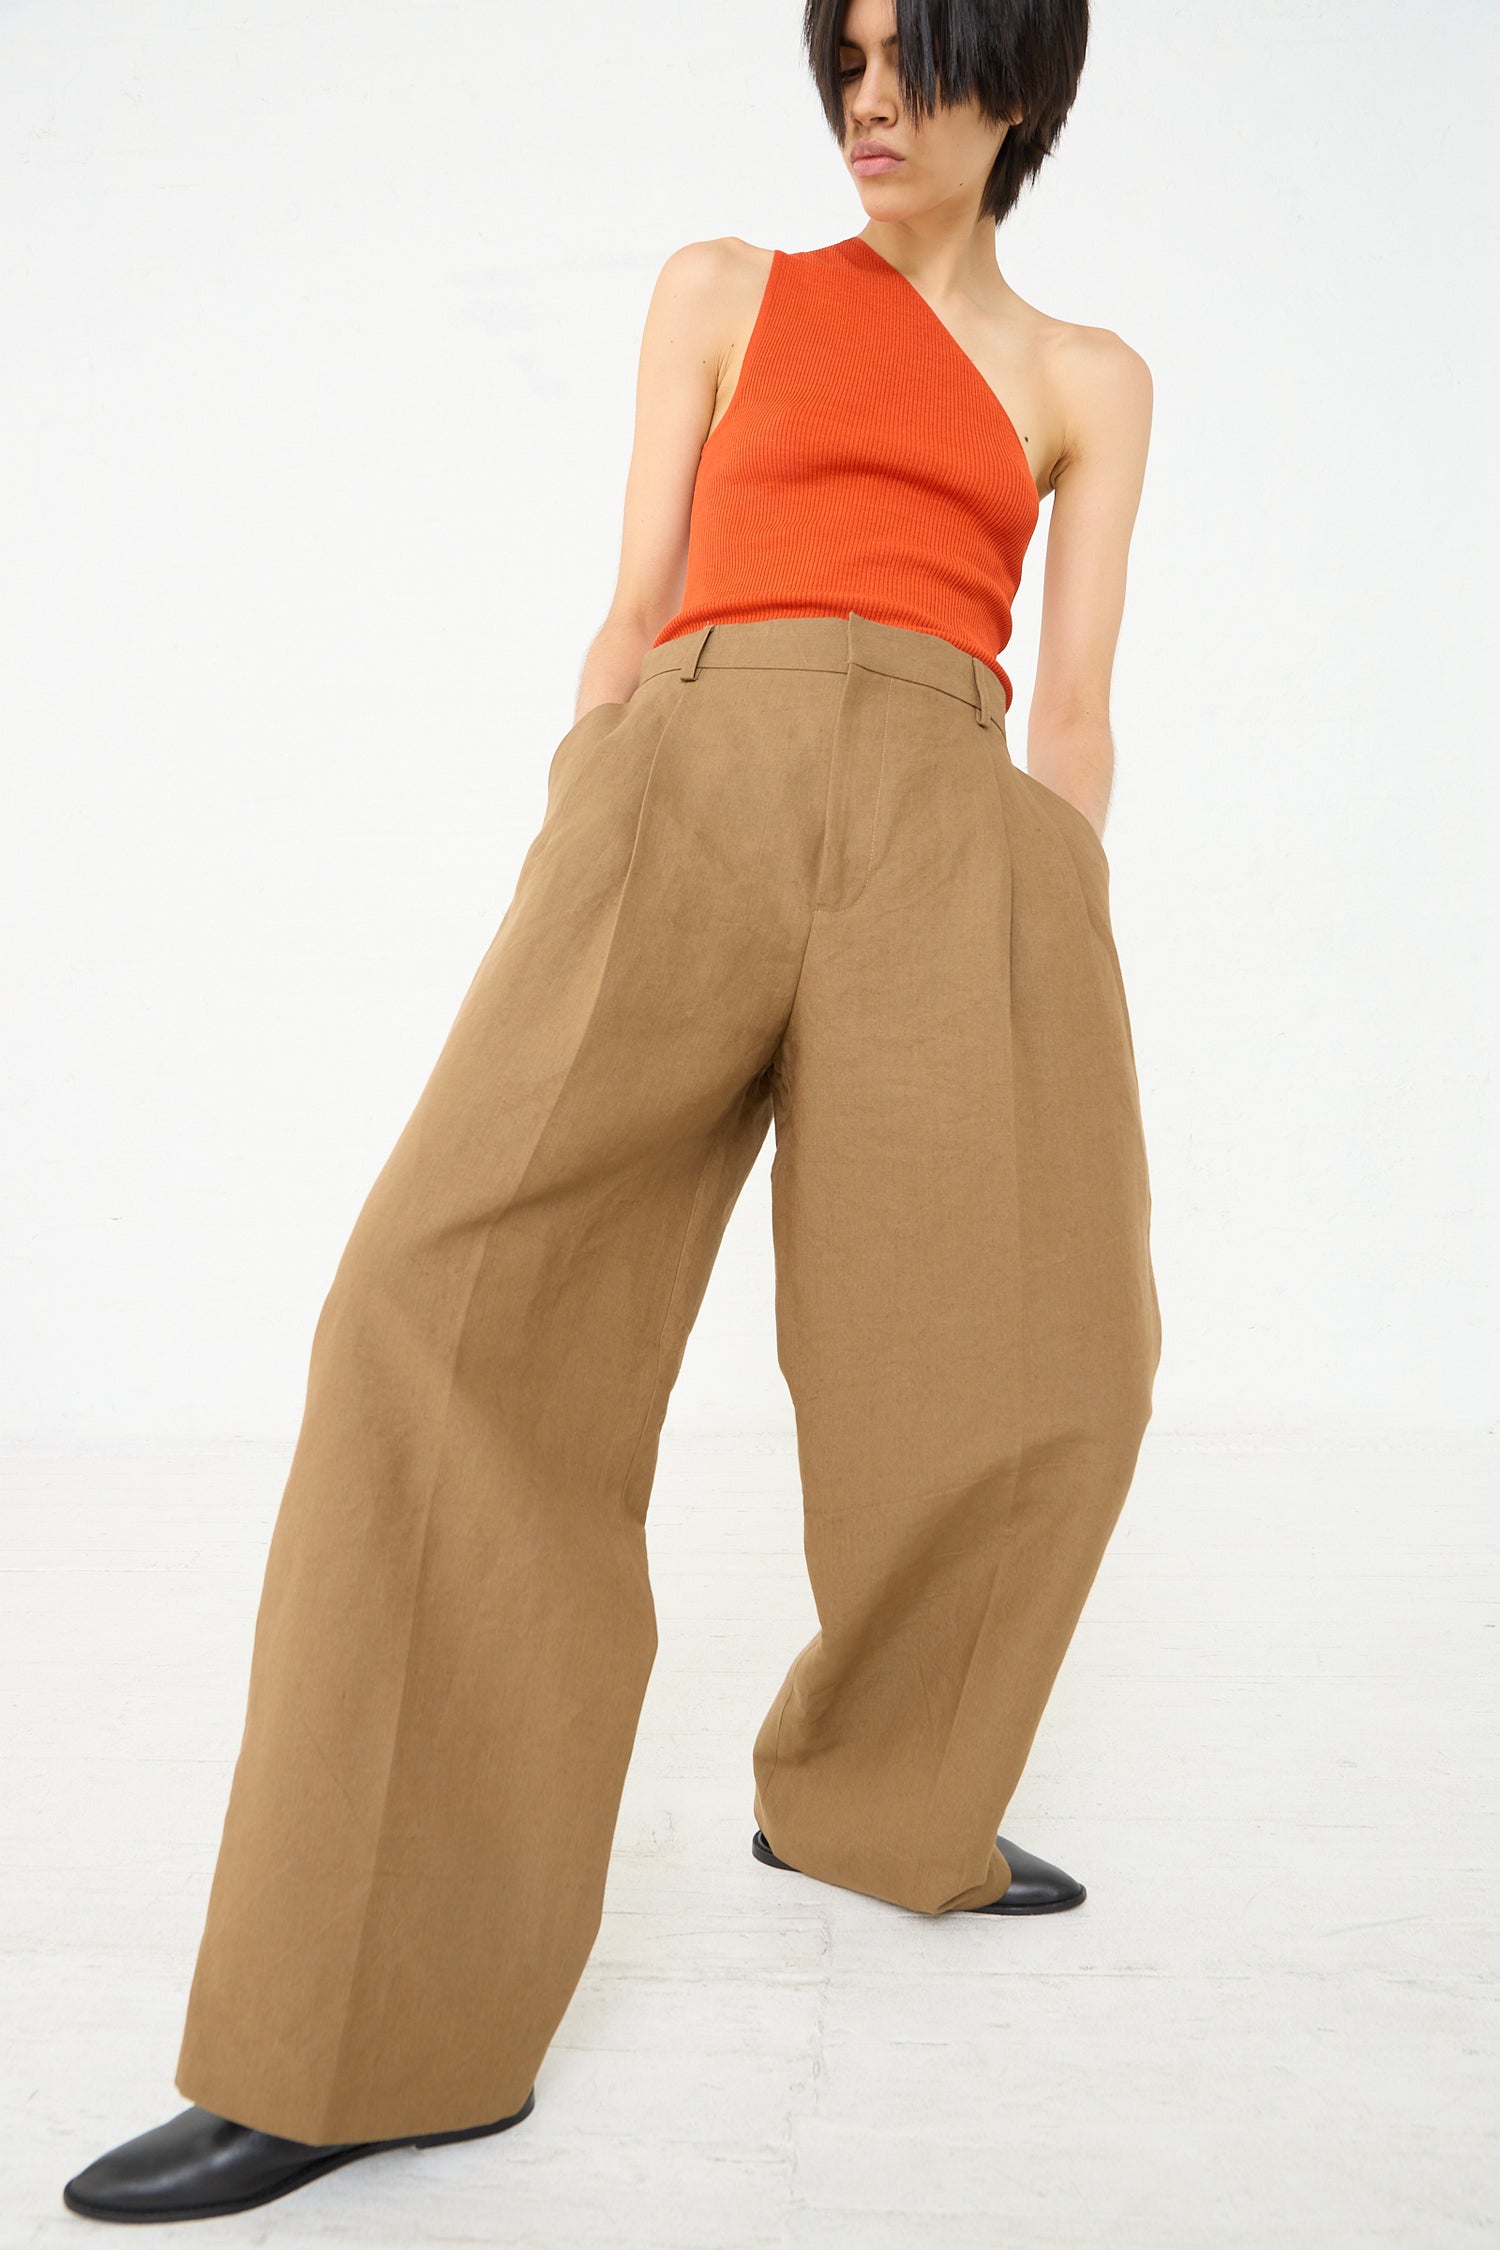 A woman in a Cristaseya Japanese Washi and Linen Canvas Double Pleated Wide Trouser in Mocha and wearing a red top.